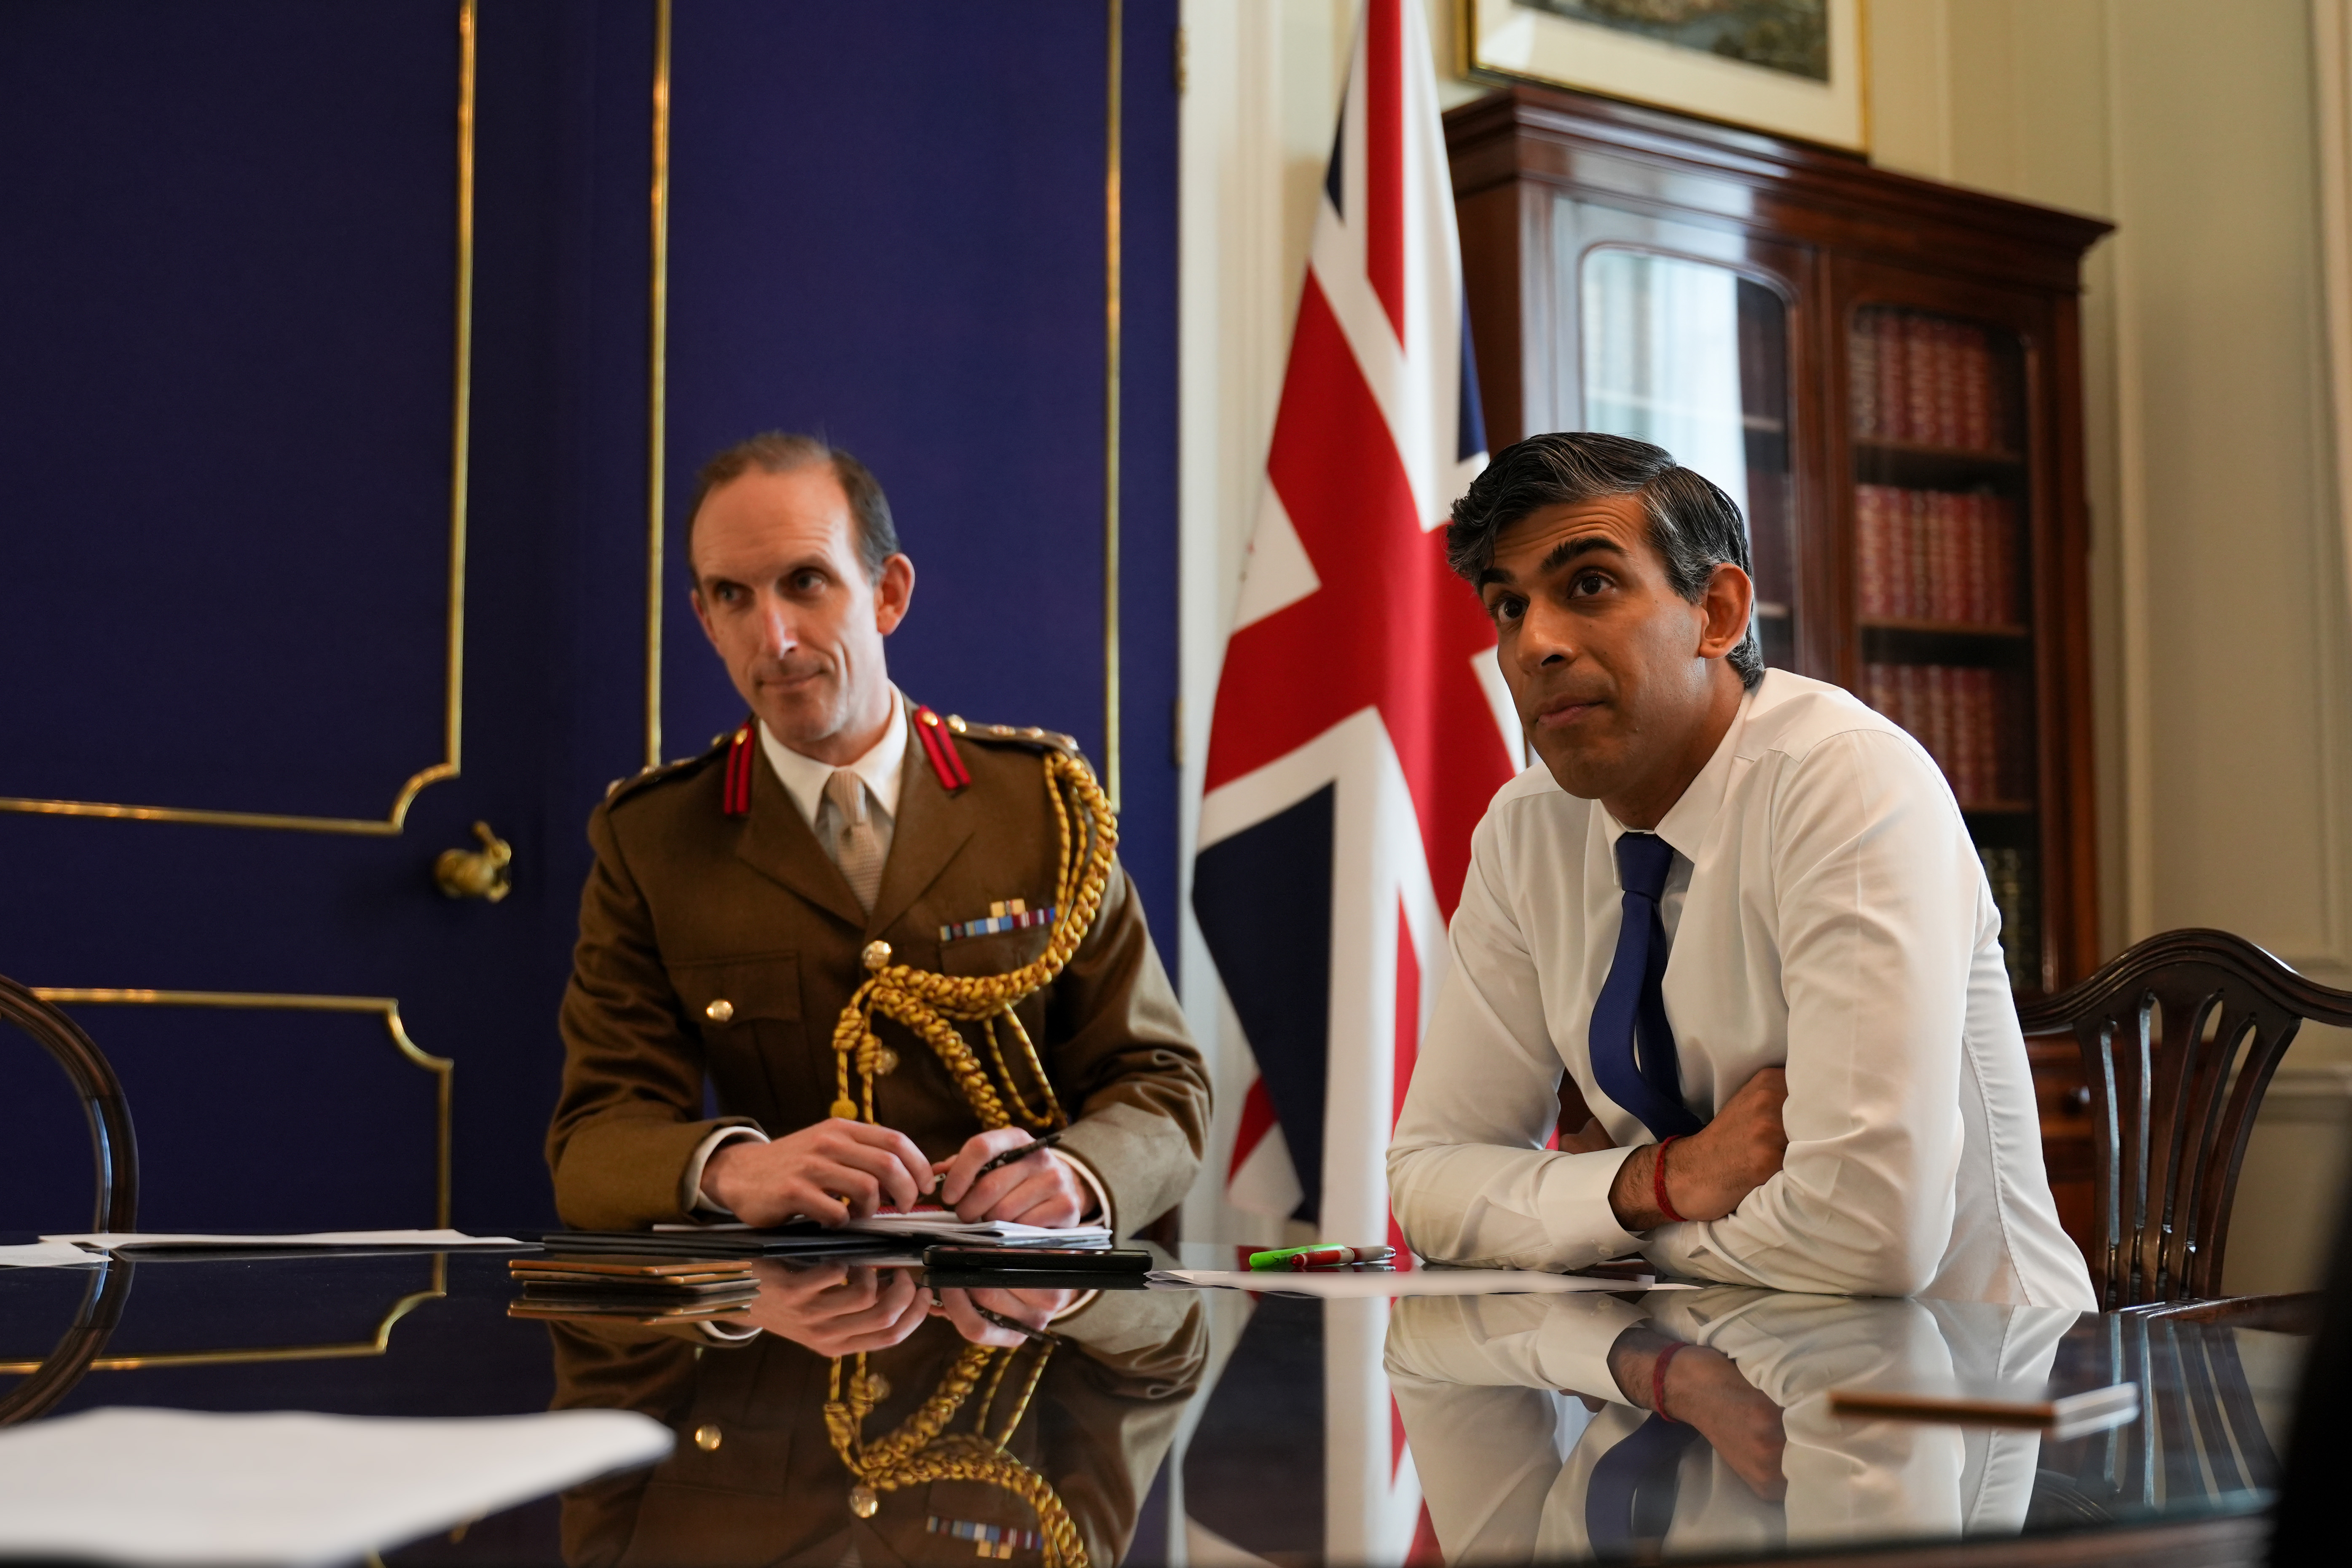 Rishi Sunak was briefed by staff before holding a call with leaders from the G7 nations